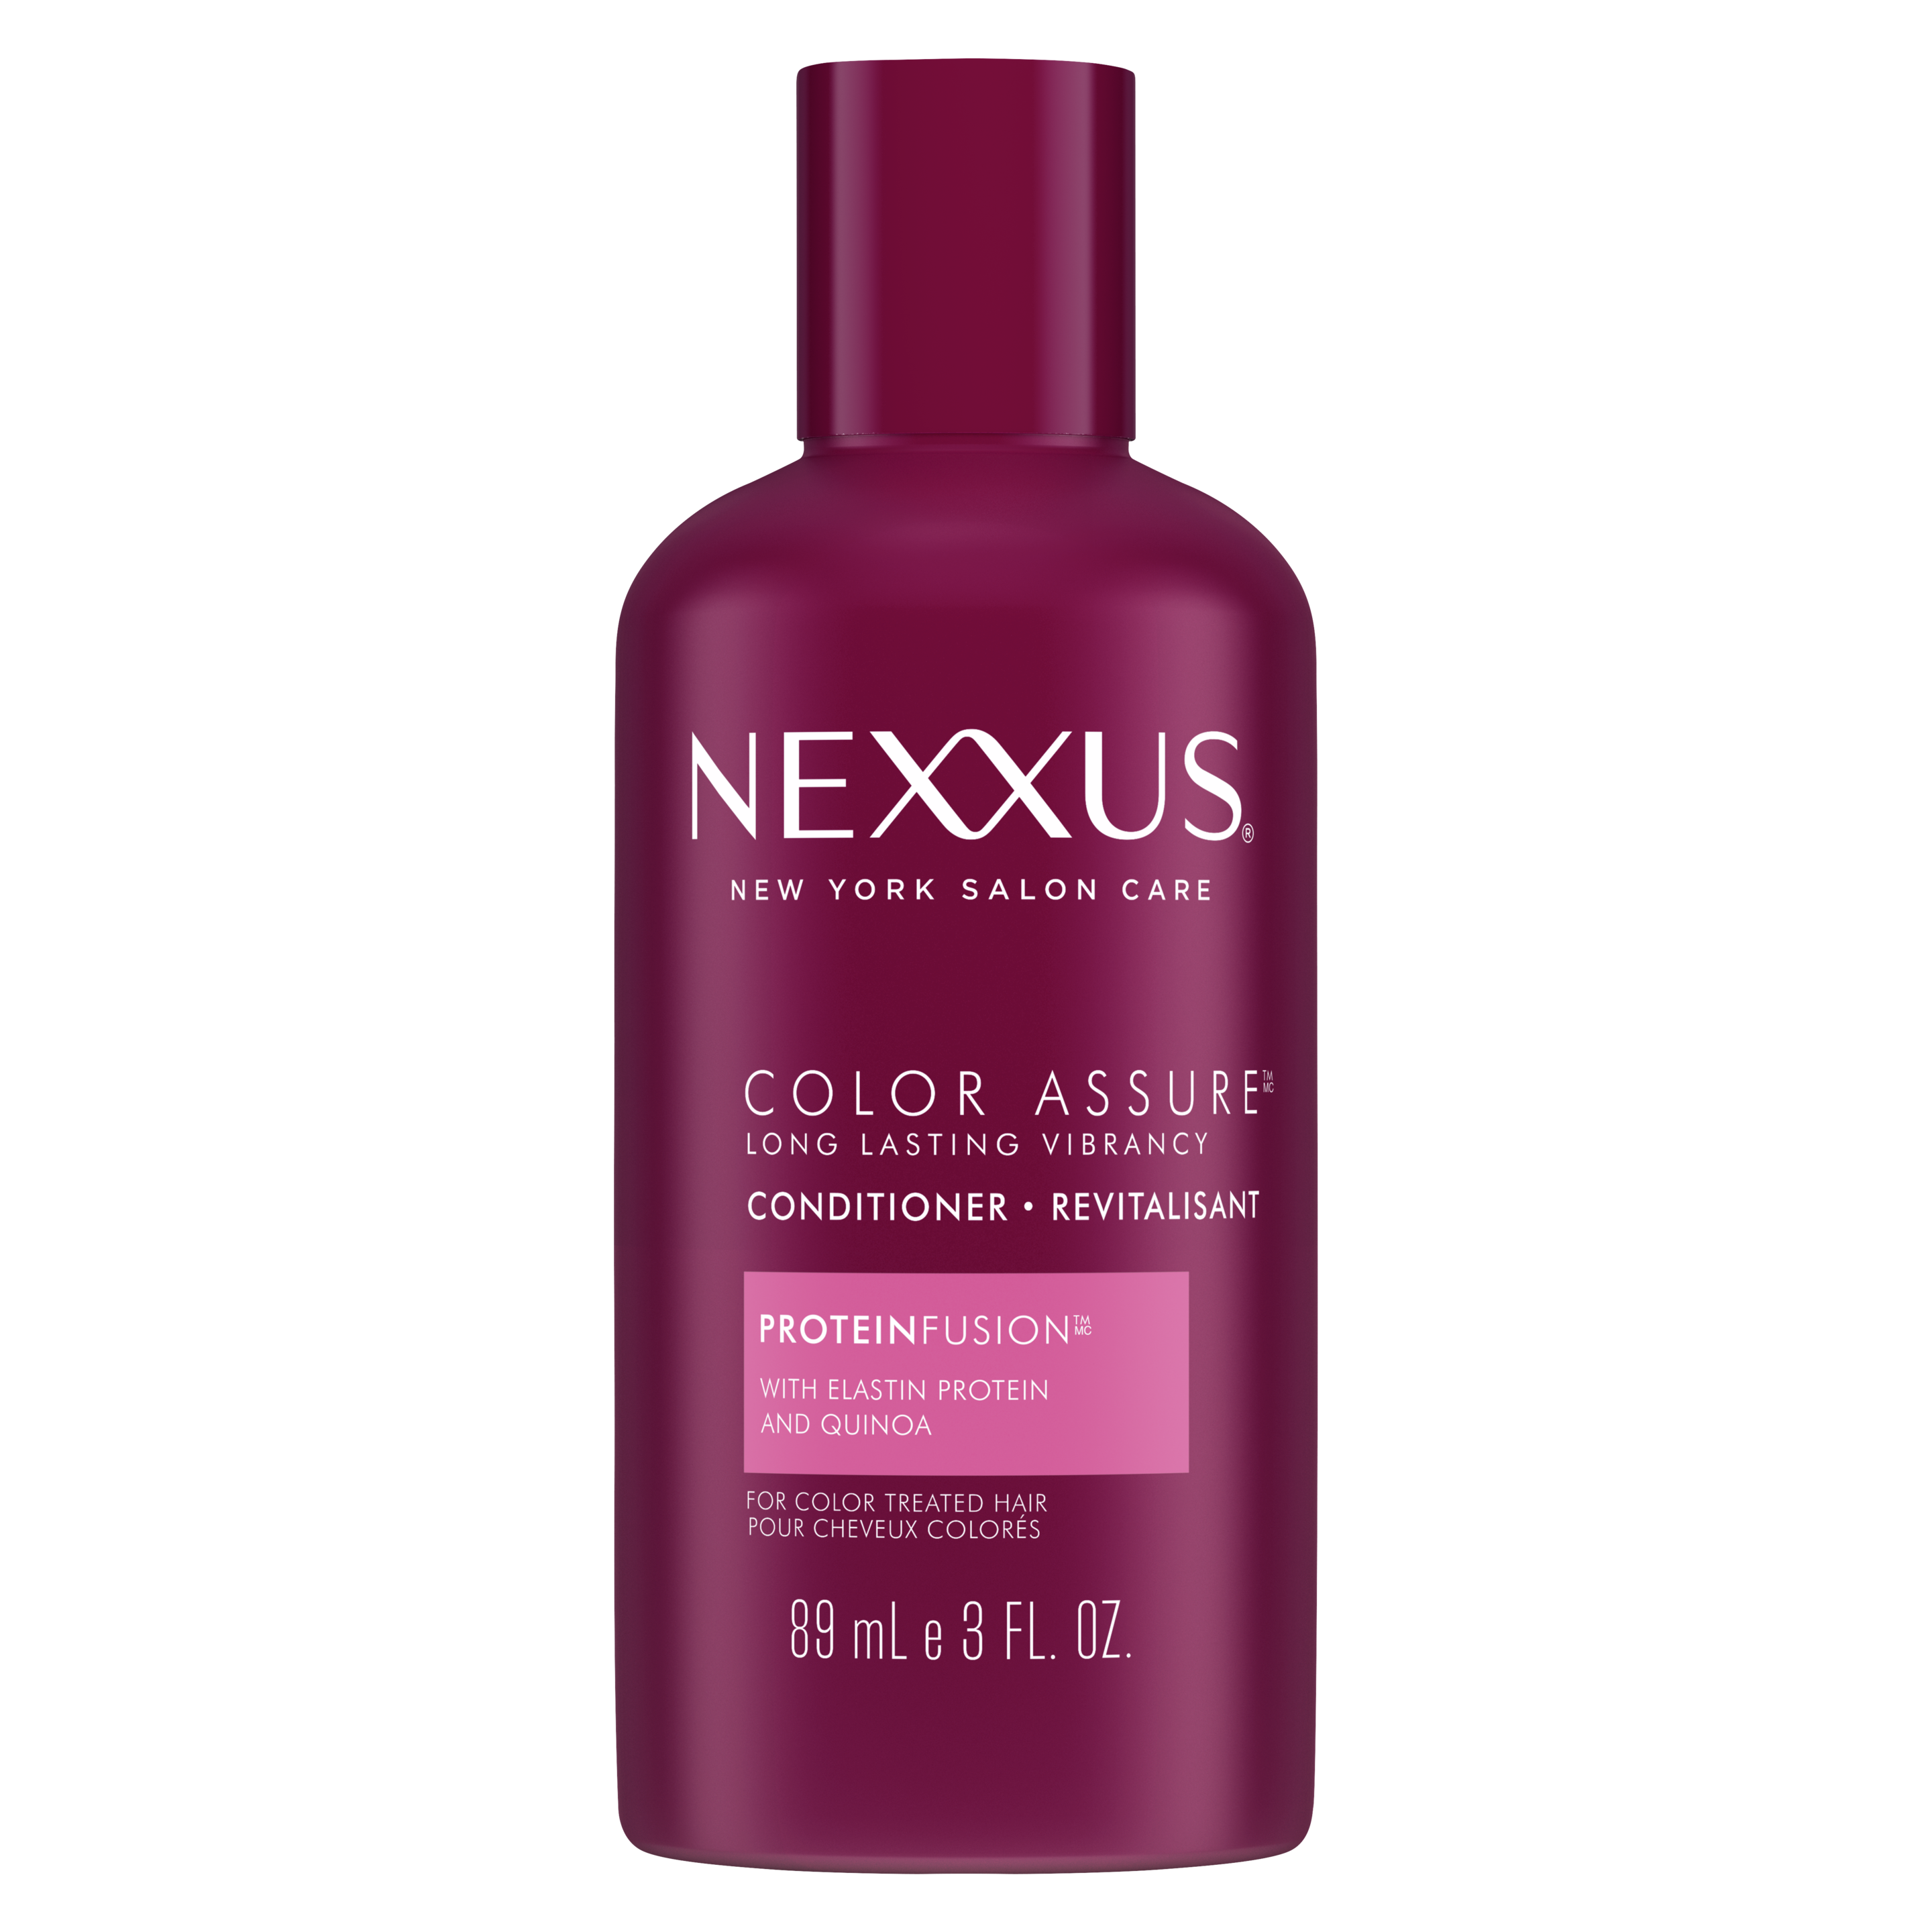 COLOUR ASSURE TRAVEL SIZED CONDITIONER FOR COLOURED HAIR